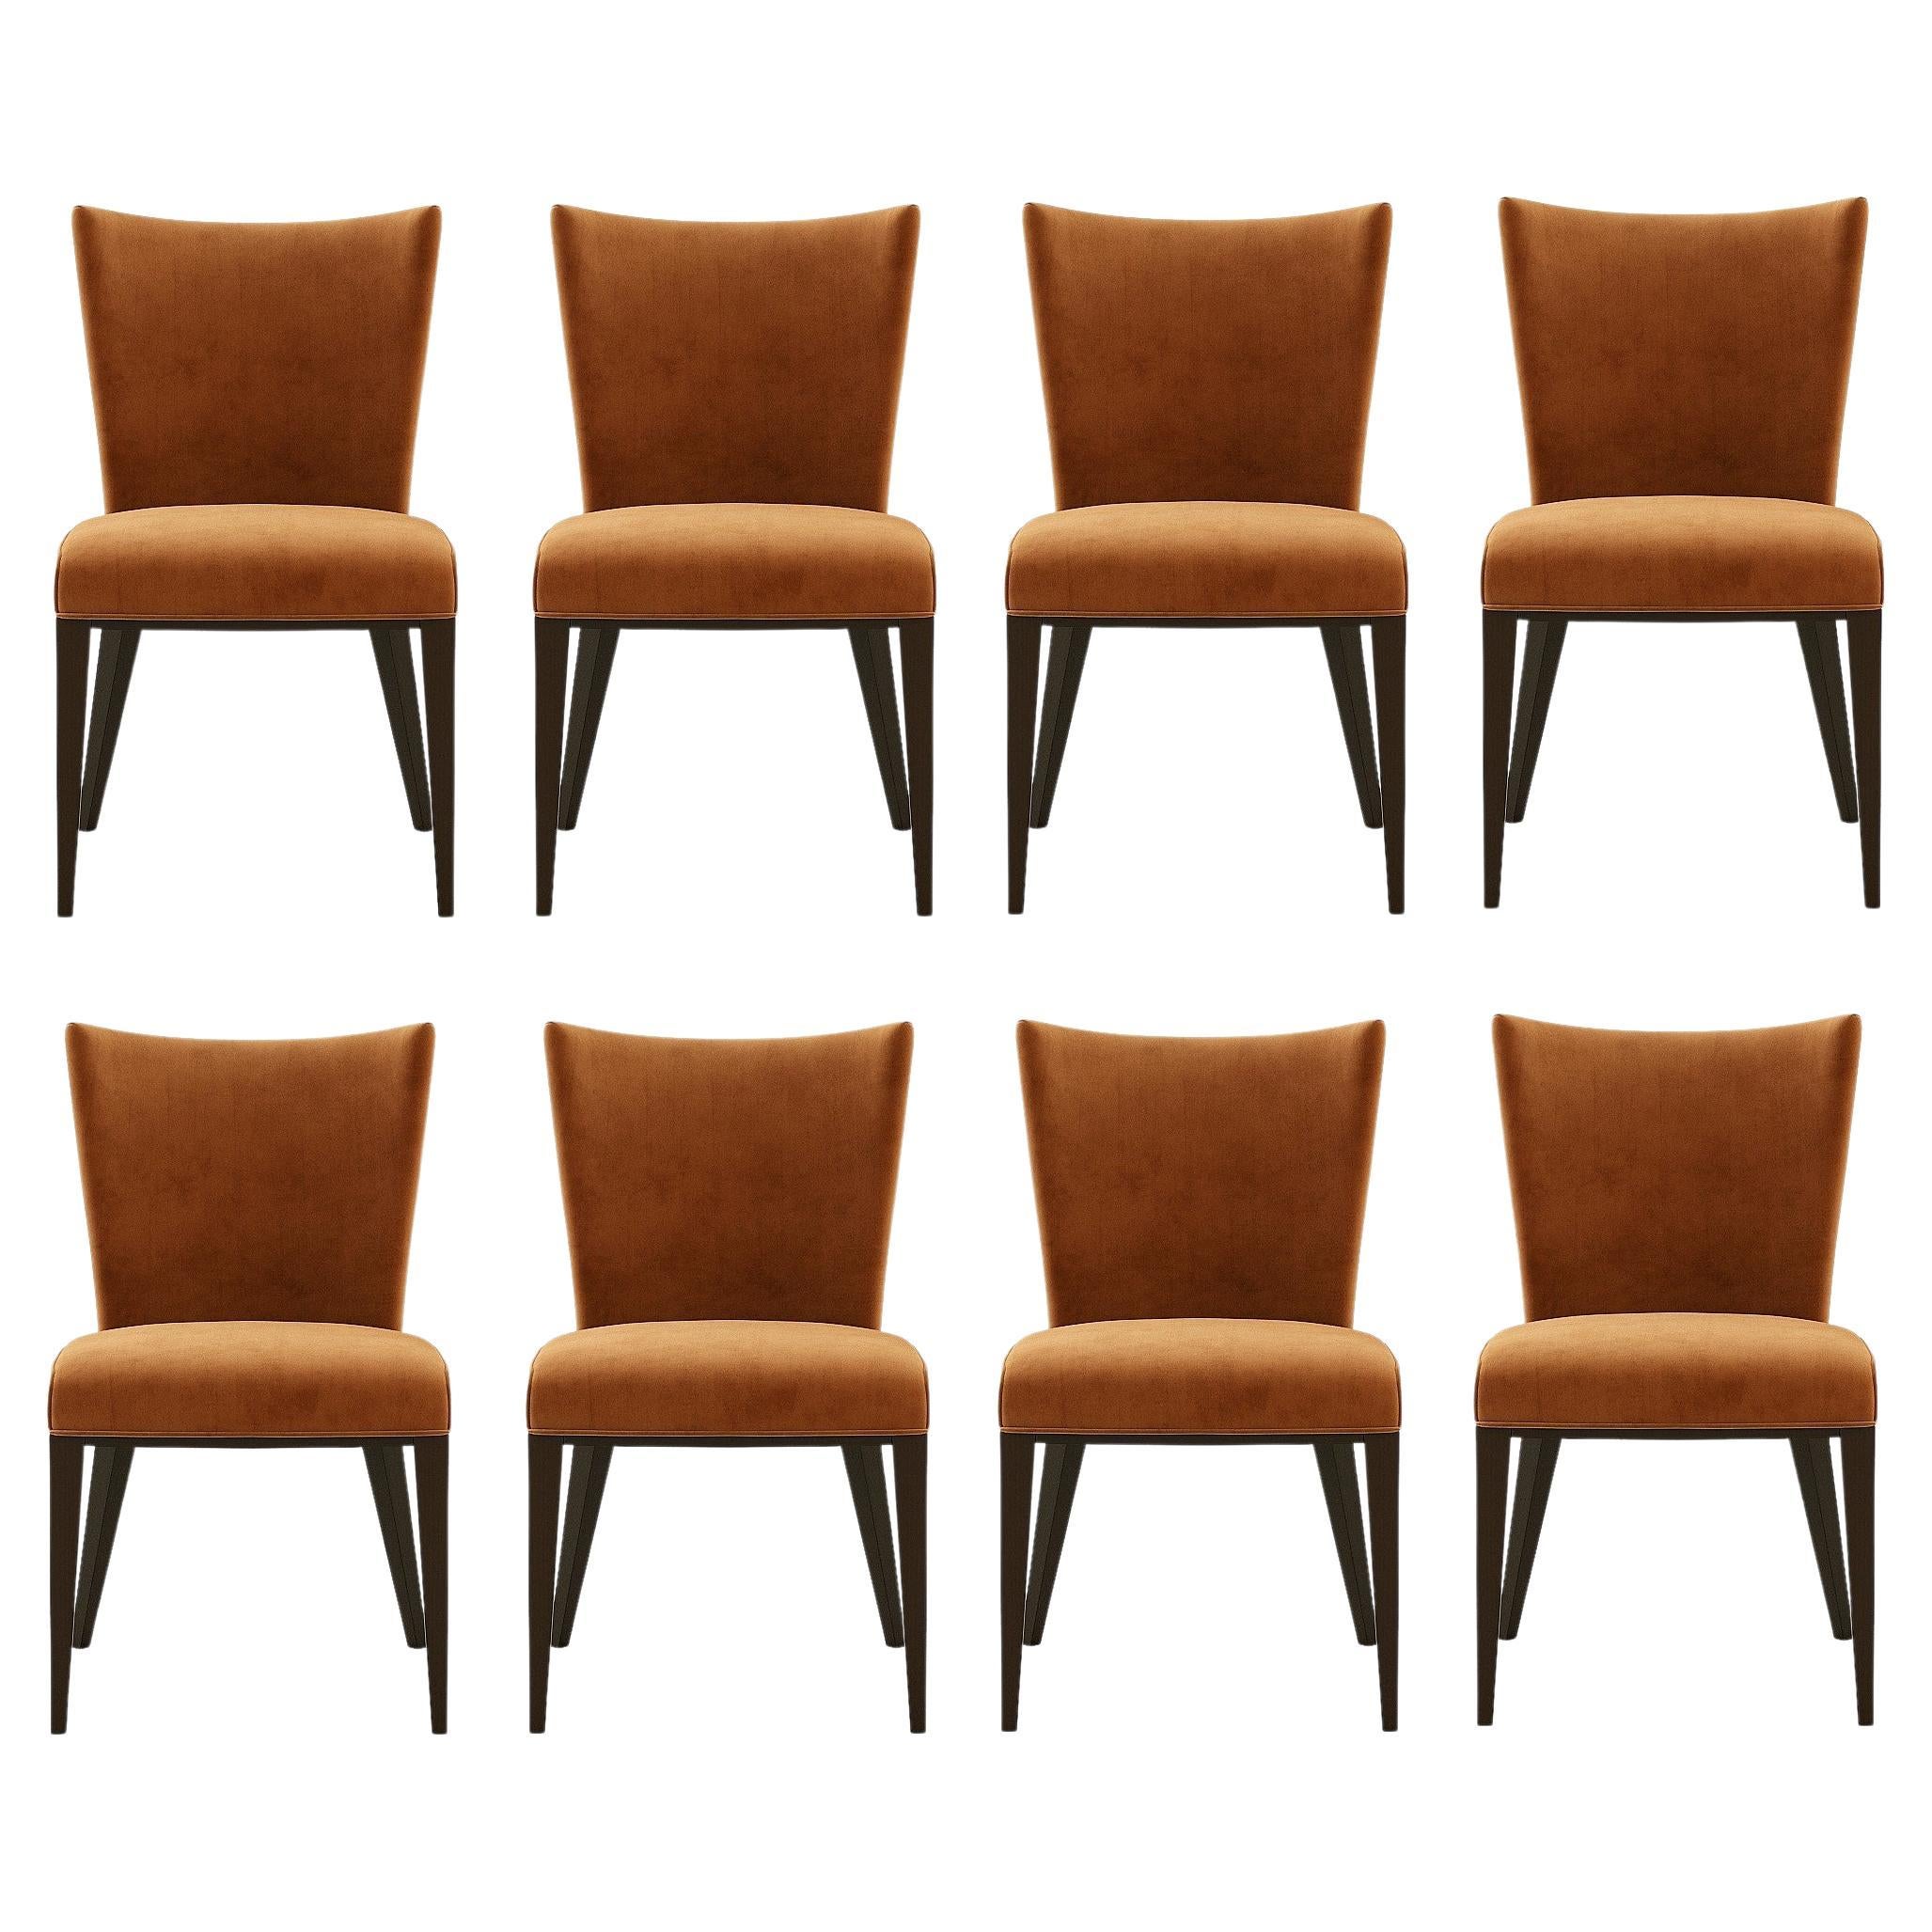 Set of 8 Contemporary Dining Chairs Upholstered in Brick Velvet